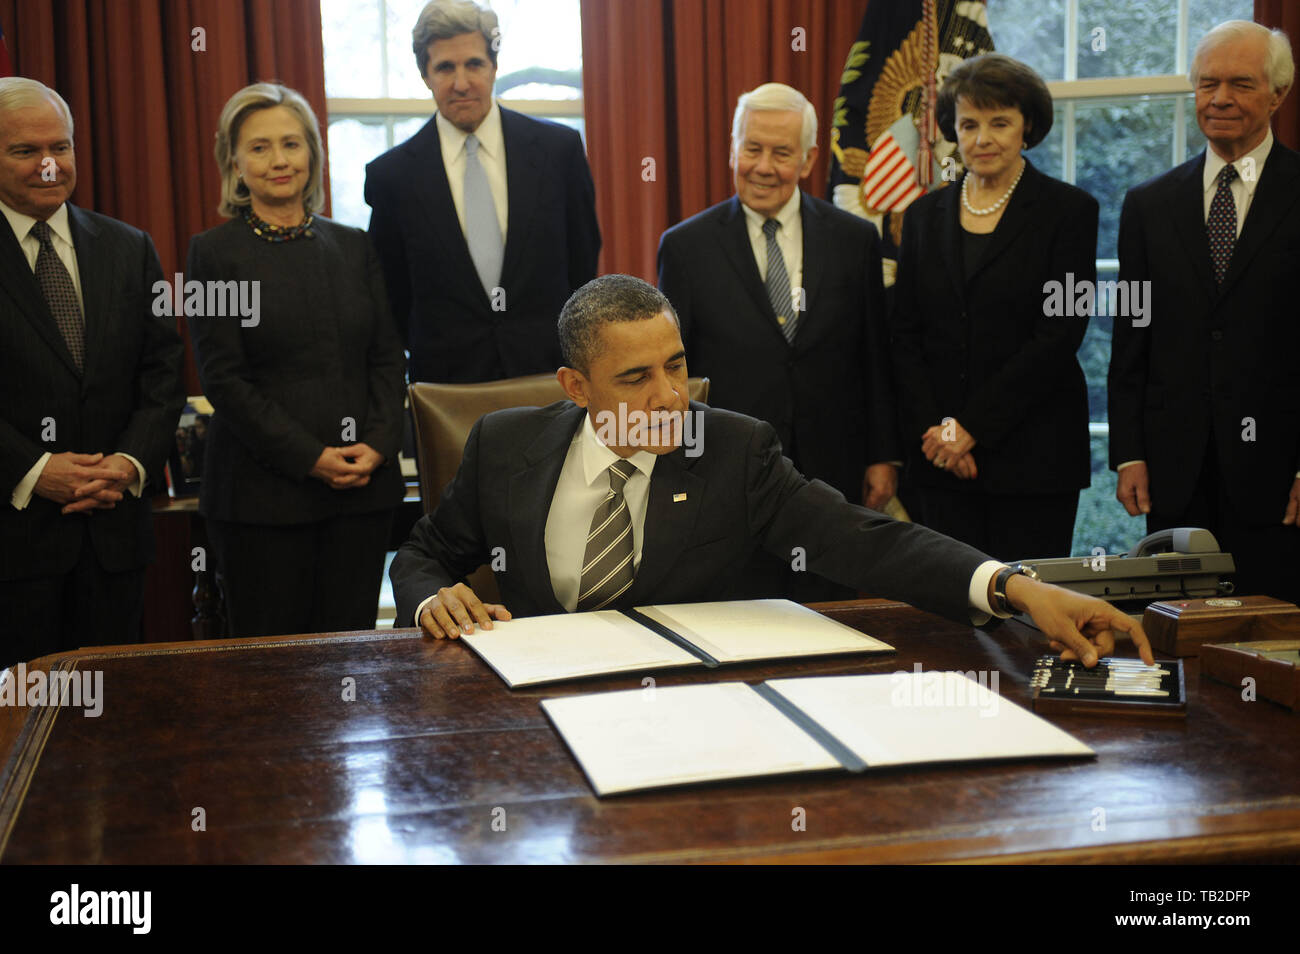 Washington, District of Columbia, USA. 2nd Feb, 2011. United States President Barack Obama signs the New START Treaty during a ceremony in the Oval Office of the White House, with, from left, U.S. Secretary of Defense Robert Gates, U.S. Secretary of State Hillary Rodham Clinton, U.S. Senator John Kerry (Democrat of Massachusetts), U.S. Senator Richard Lugar (Republican of Indiana), U.S. Senator Dianne Feinstein (Democrat of California), U.S. Senator Thad Cochran (Republican of Mississippi. Credit: Leslie E. Kossoff/Pool via CNP Credit: Leslie E. Kossoff/CNP/ZUMA Wire/Alamy Live News Stock Photo